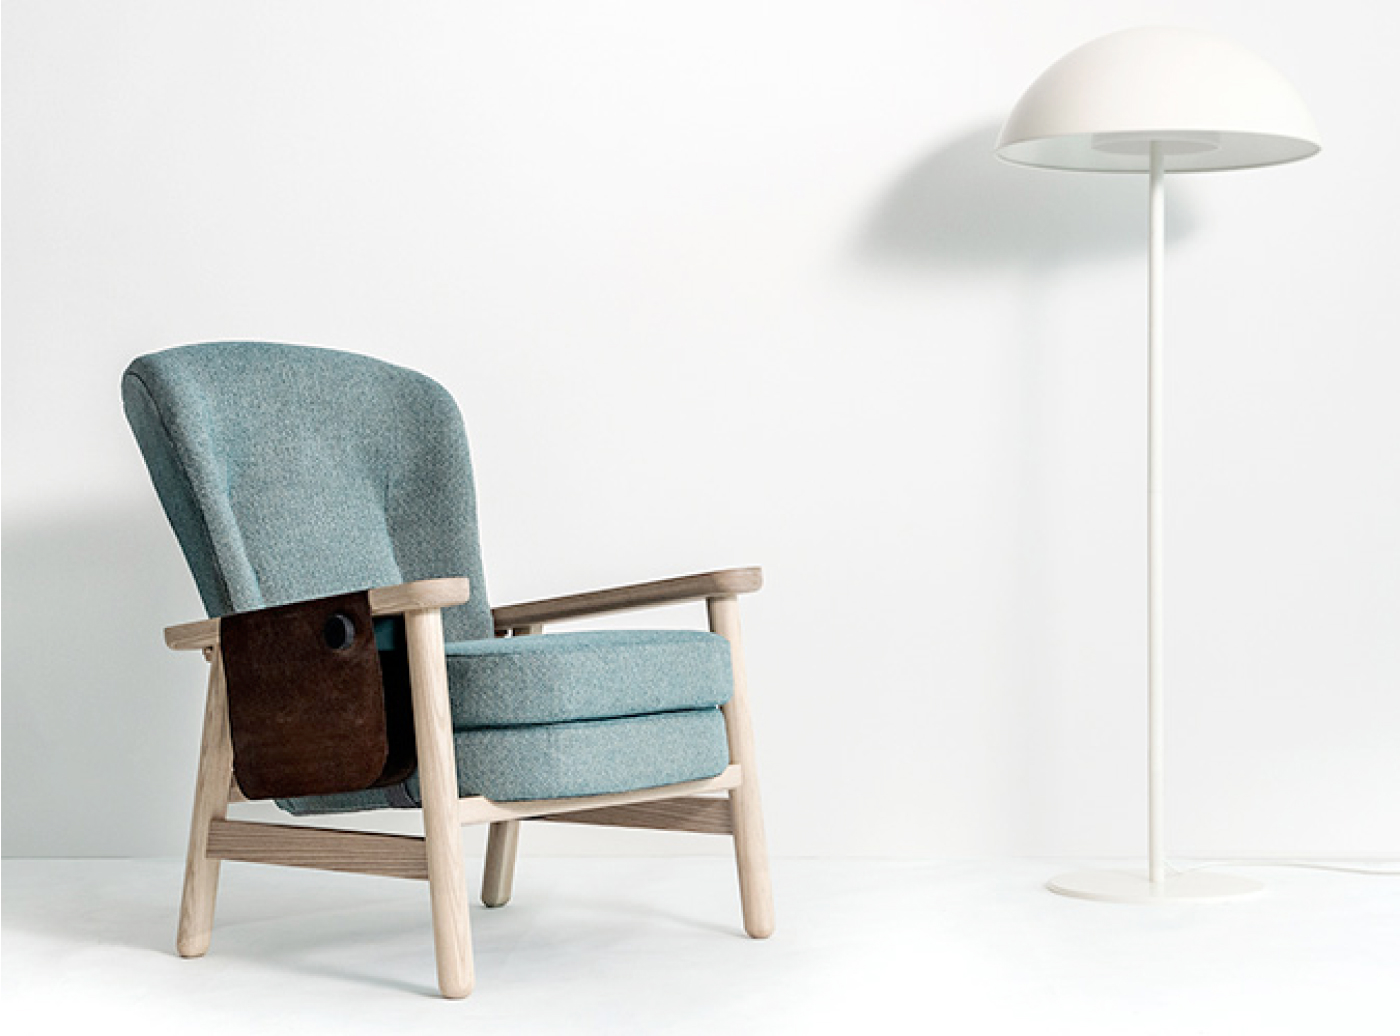 <a href="https://www.designpartners.com/projects/the-empathy-chair/" target="_blank">Jacinta’s Chair</a>